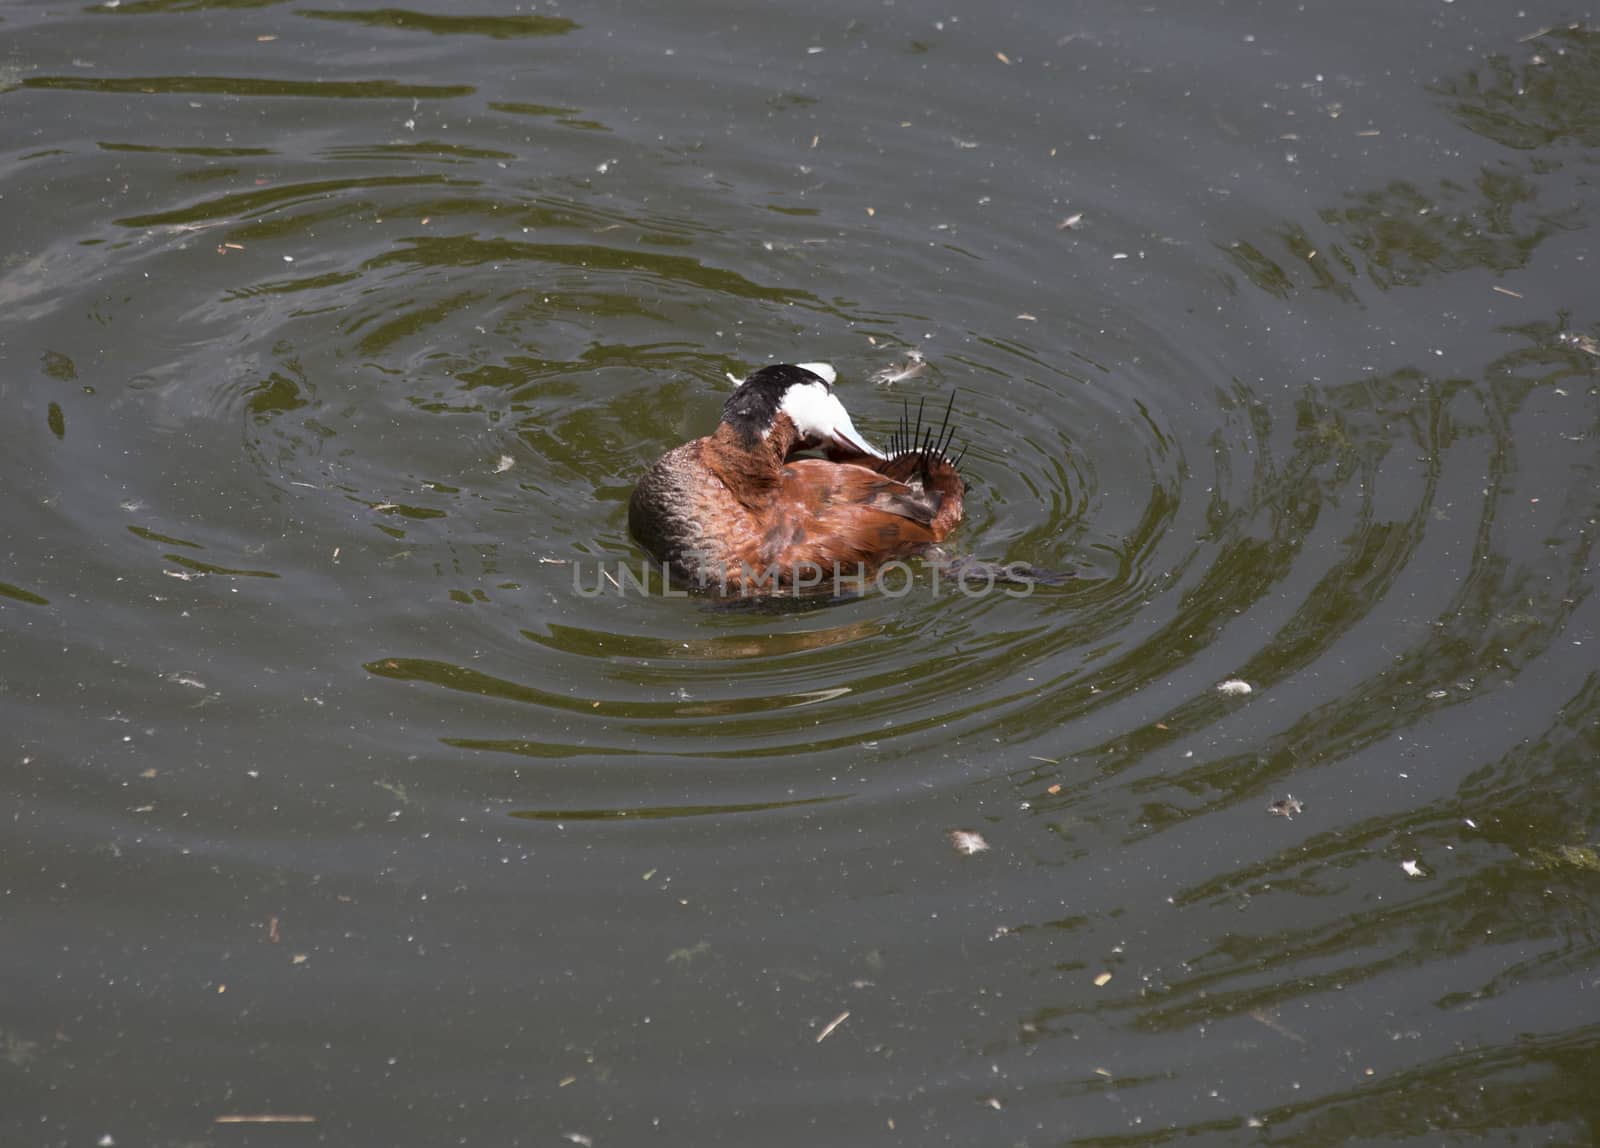 Ruddy duck (Oxyura jamaicensis) in a small pond